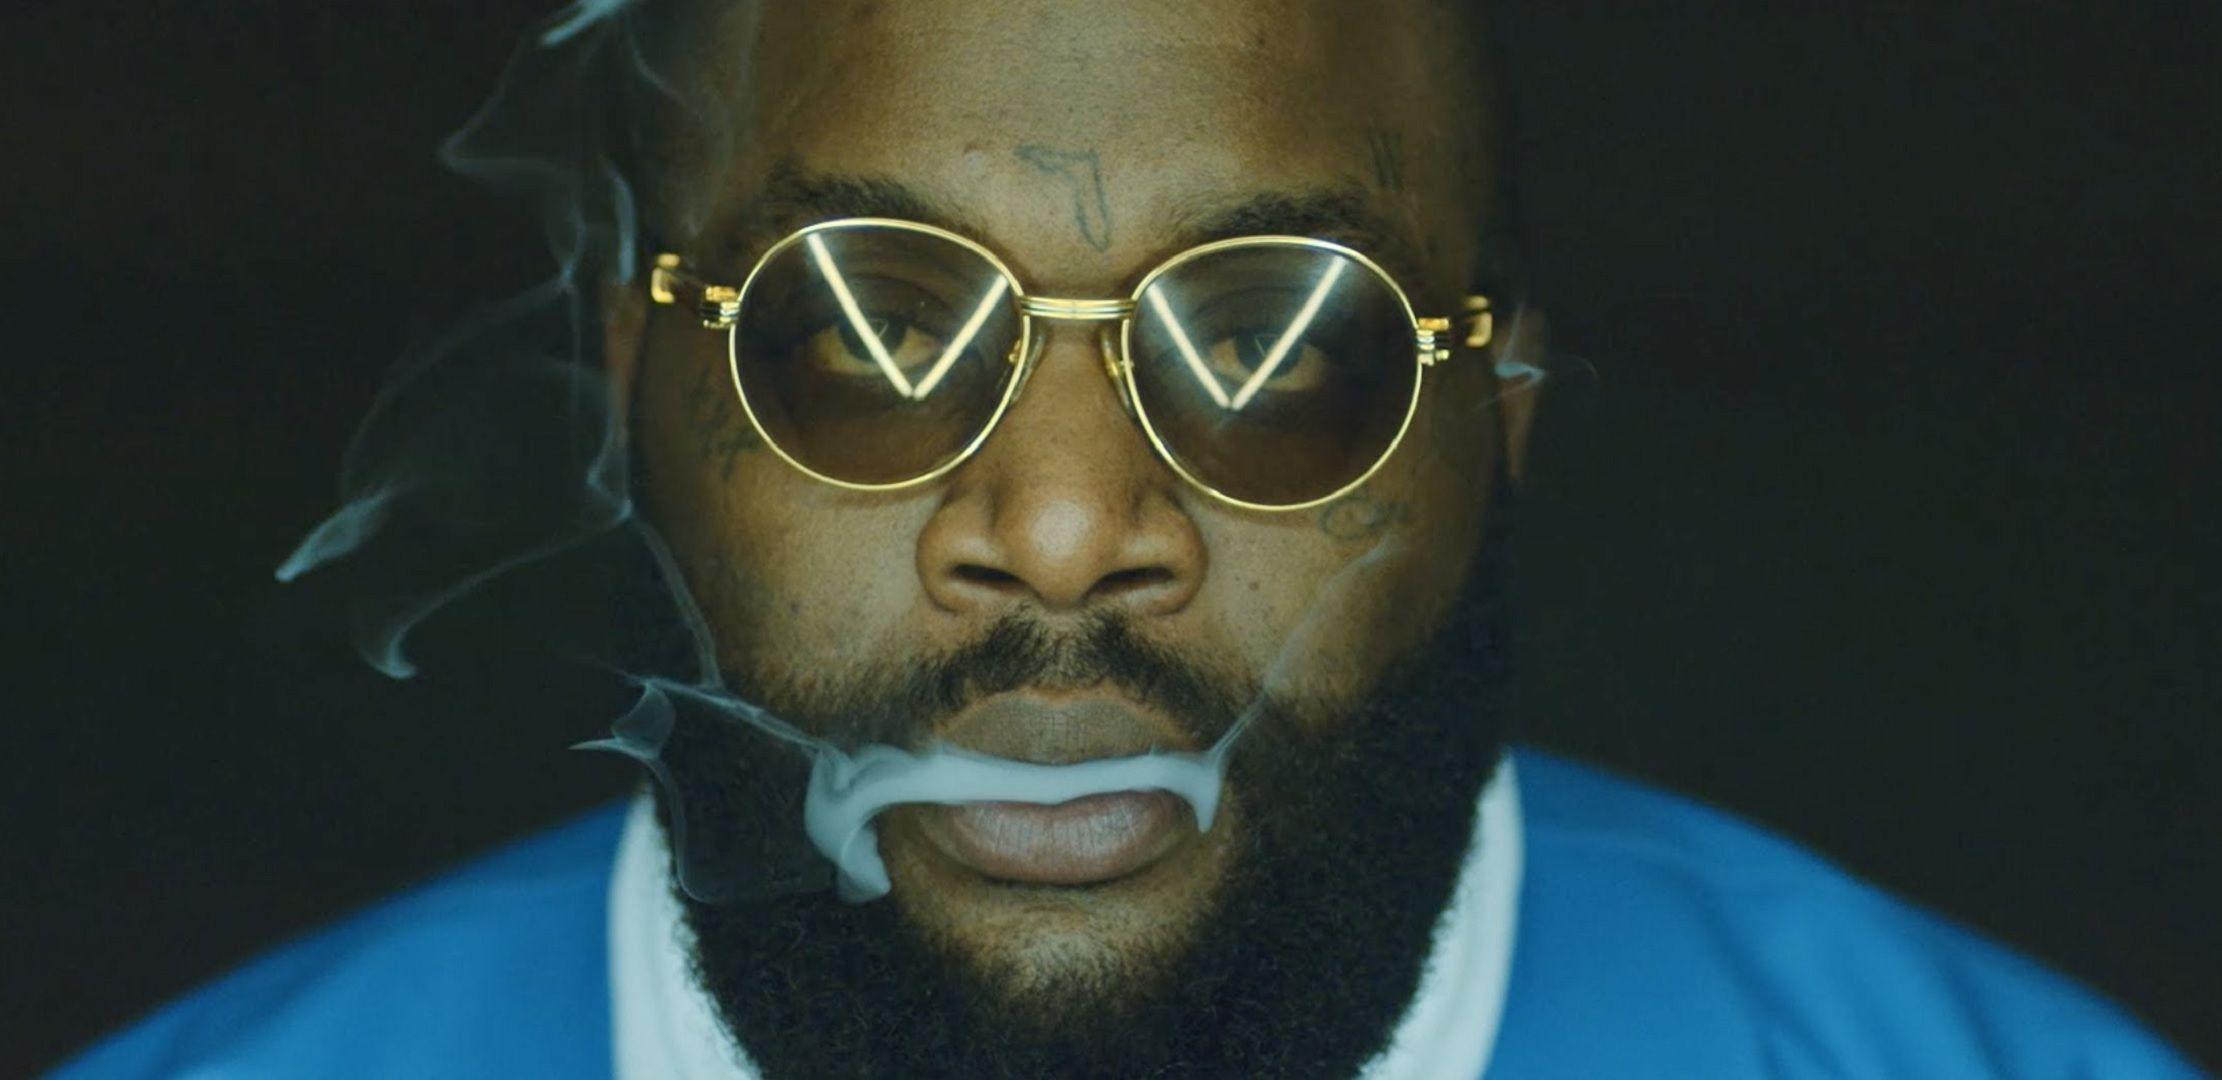 Rick Ross Wallpaper Image Photo Picture Background